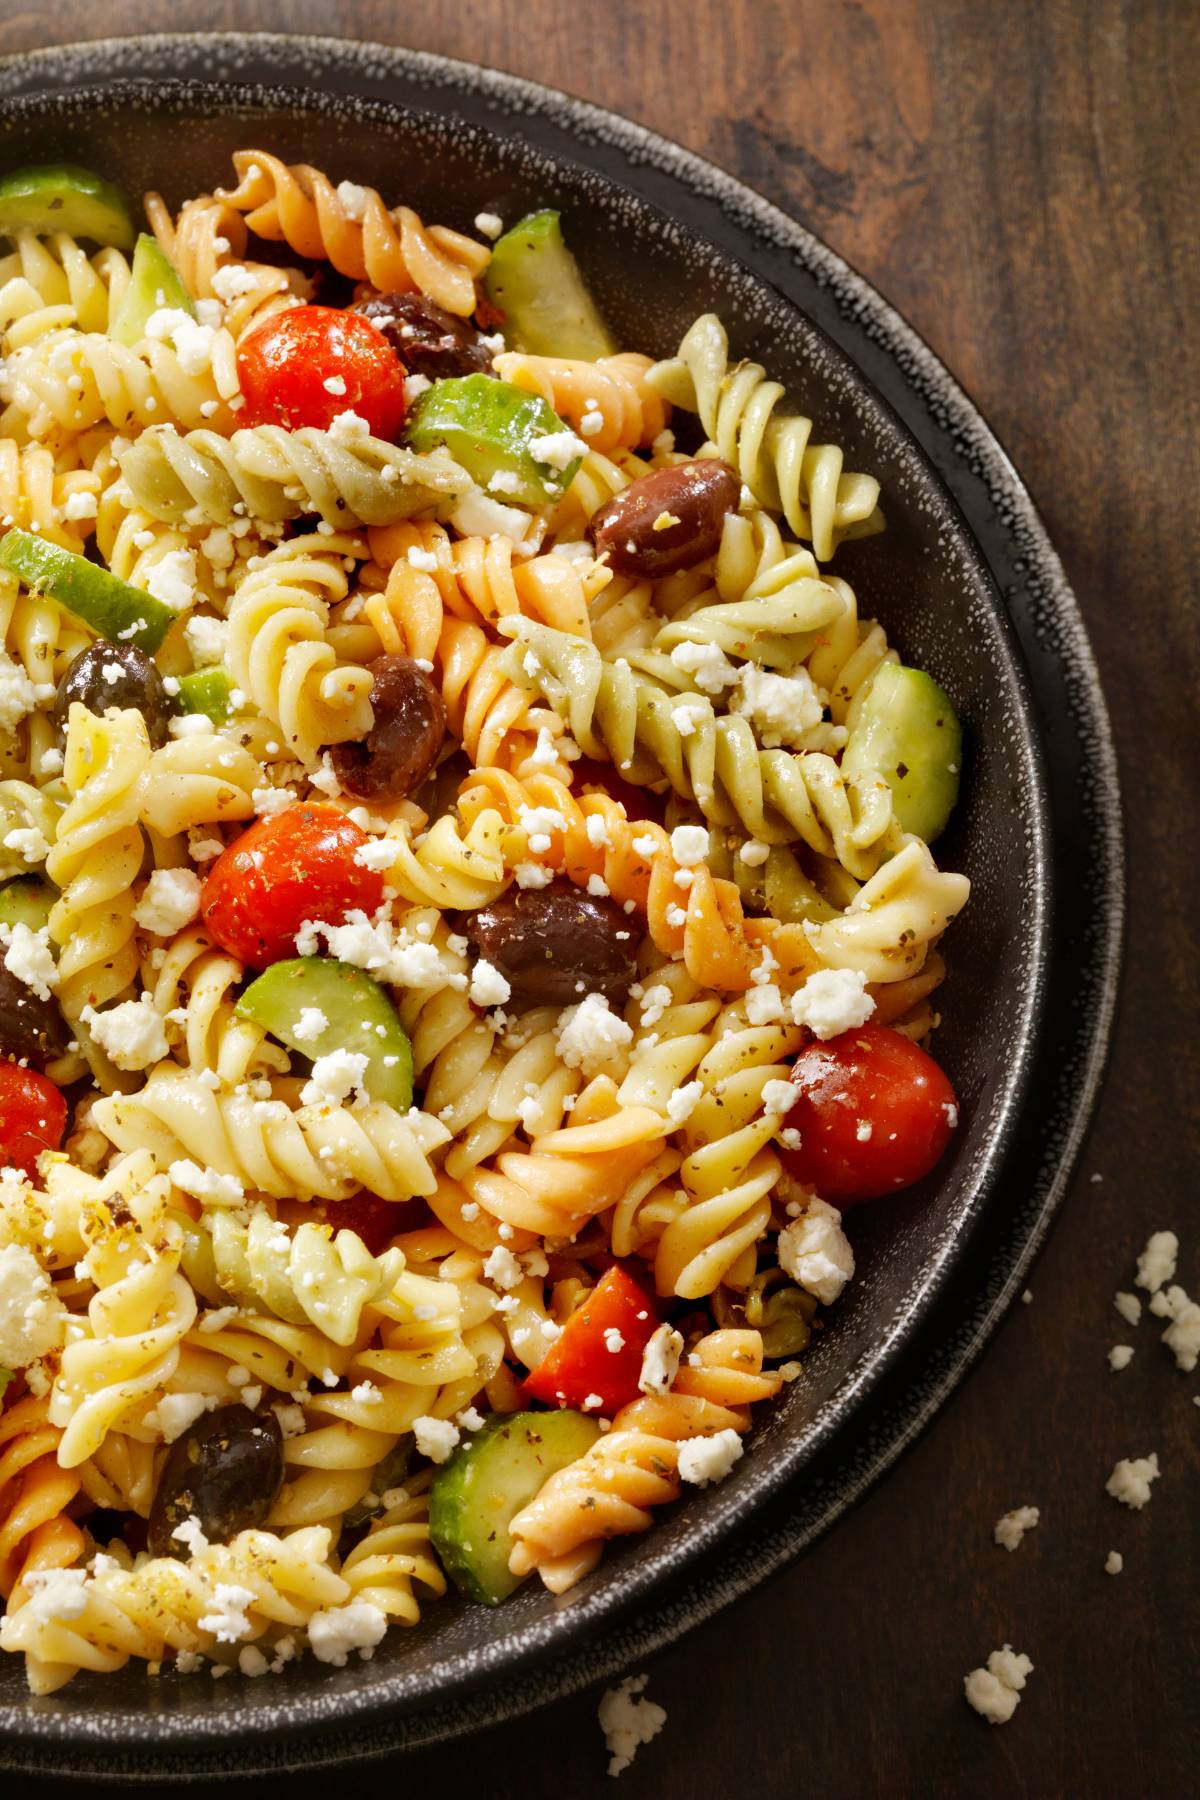 30-minute Pasta Dishes: For Your Next Event